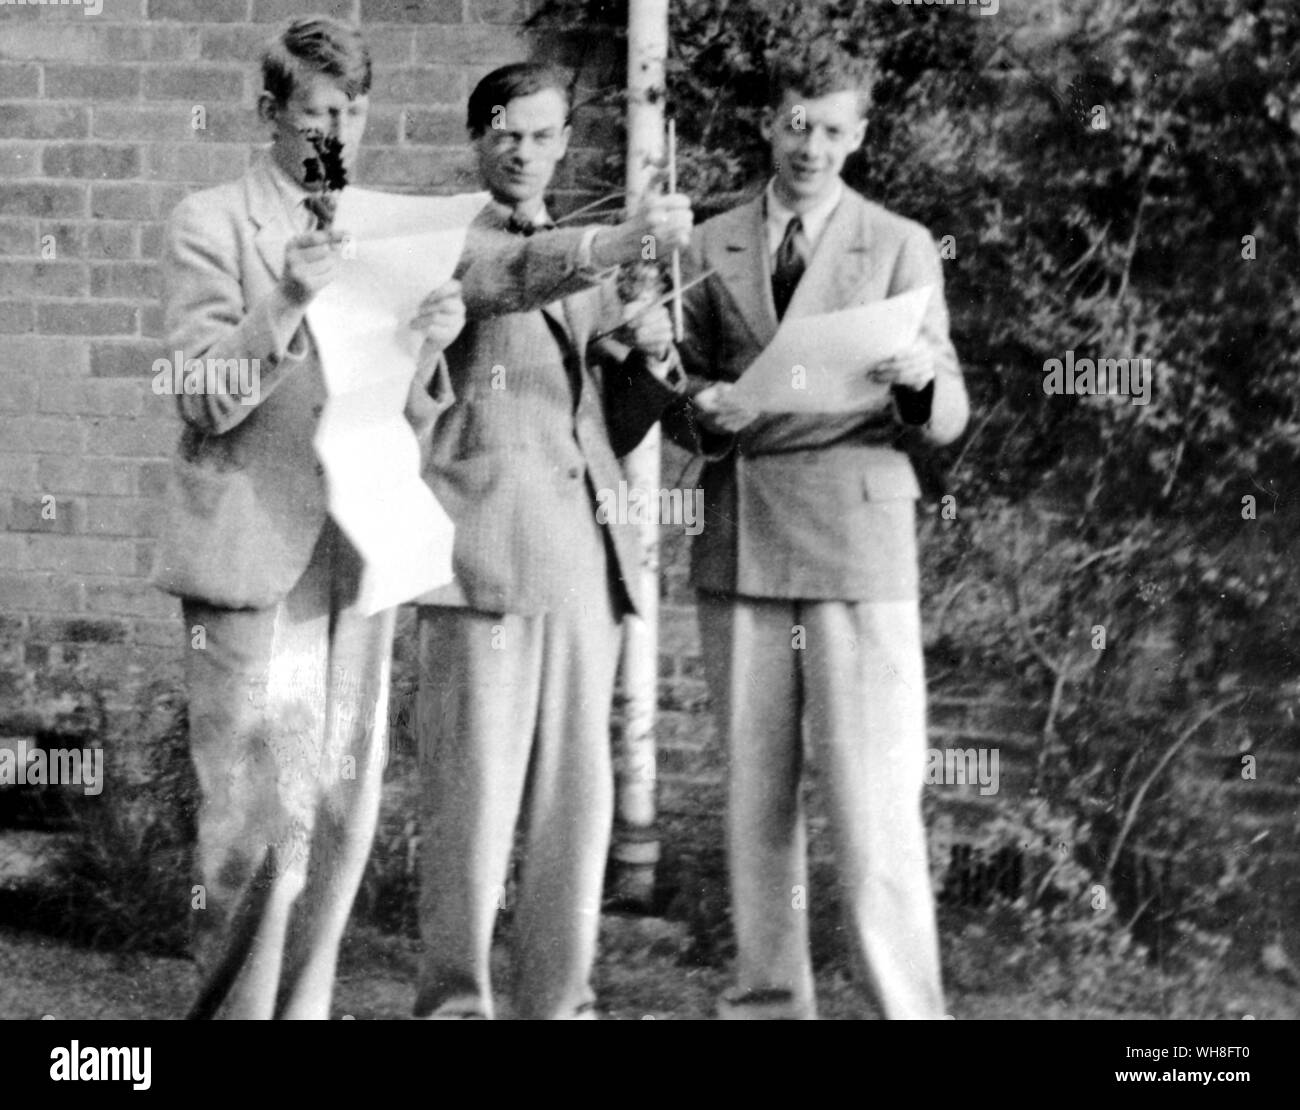 W H Auden (1907-1973) with William Coldstream (1908-1987) and Benjamin Britten (1913-1976) at the Downs School, Colwell, 1935. W H Auden, The Life of a Poet, by Charles Osborne.. . Stock Photo